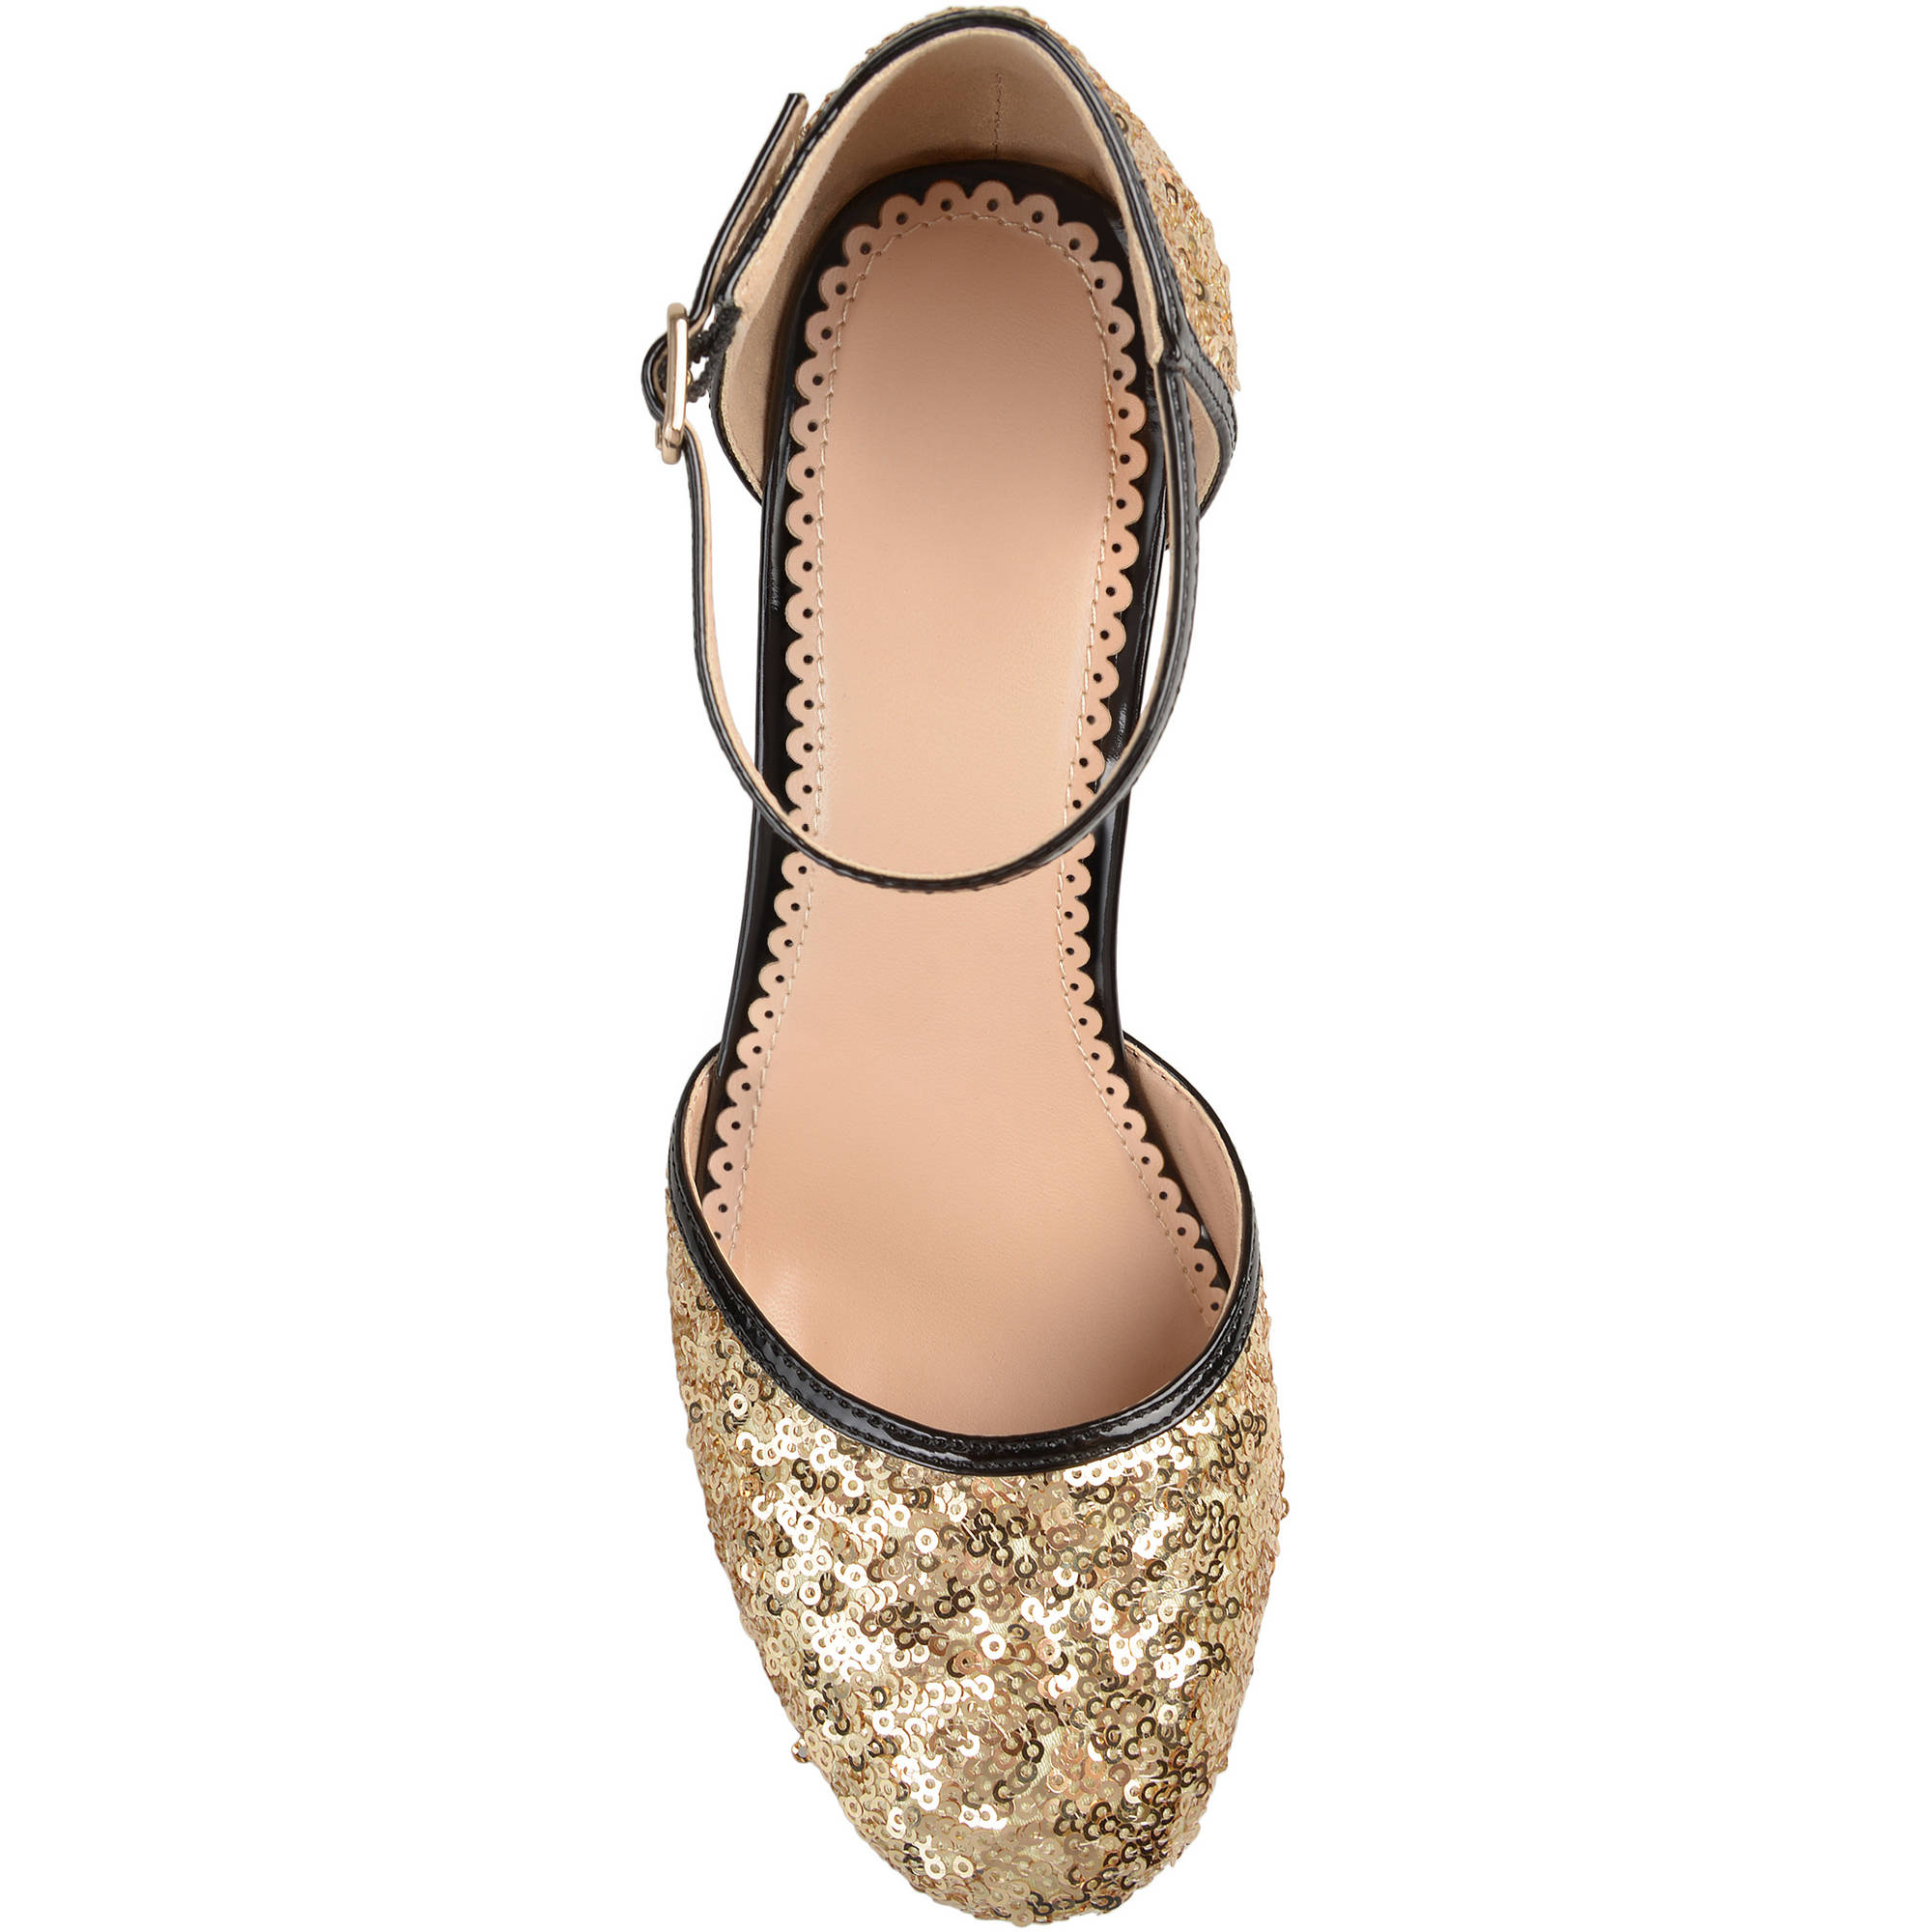 Women's Sequin Faux Leather Piping Mary Janes - image 5 of 8